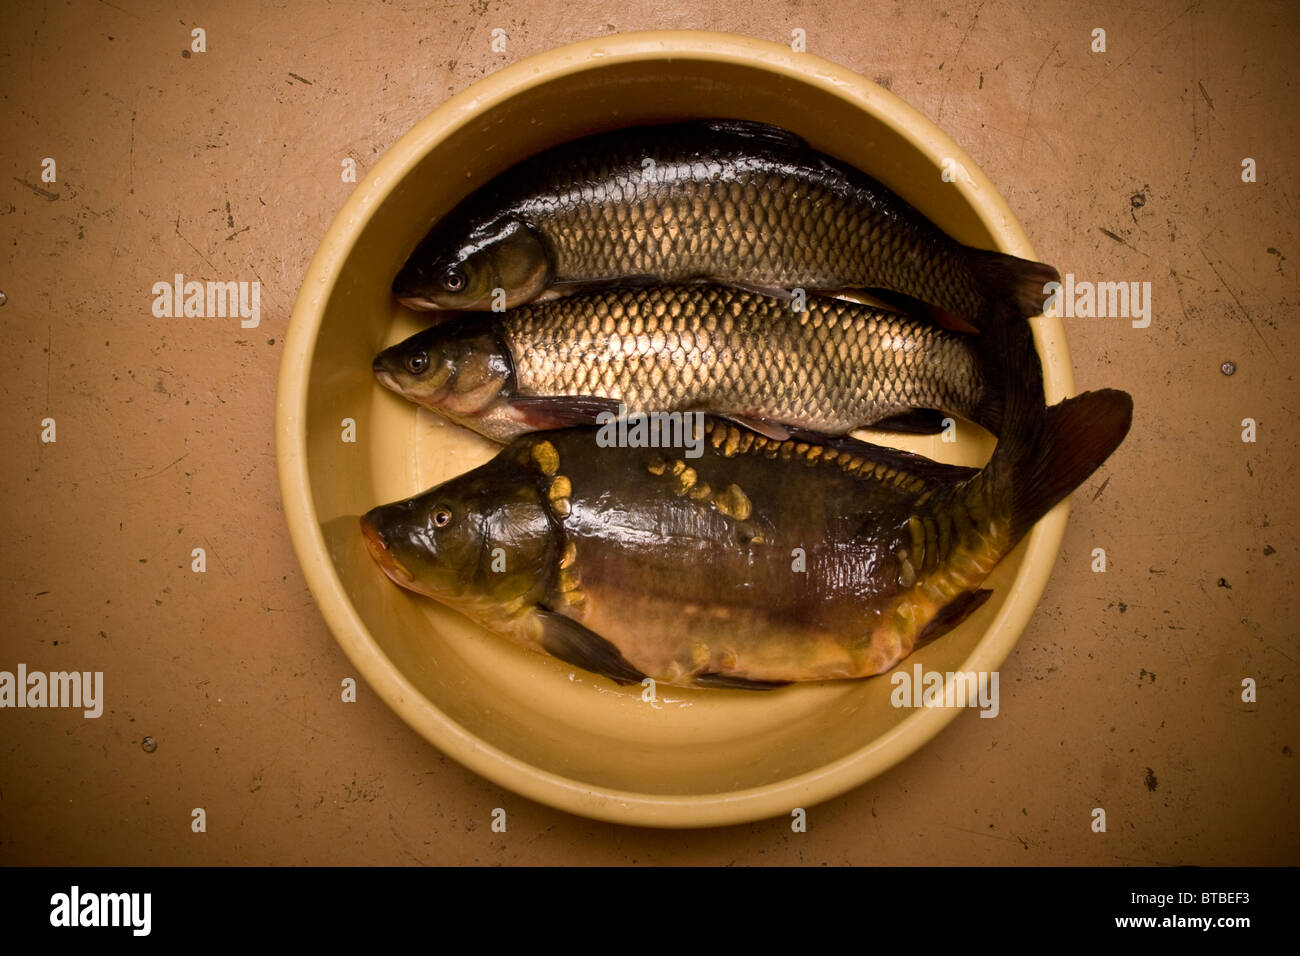 Three big fishes in bowl Stock Photo